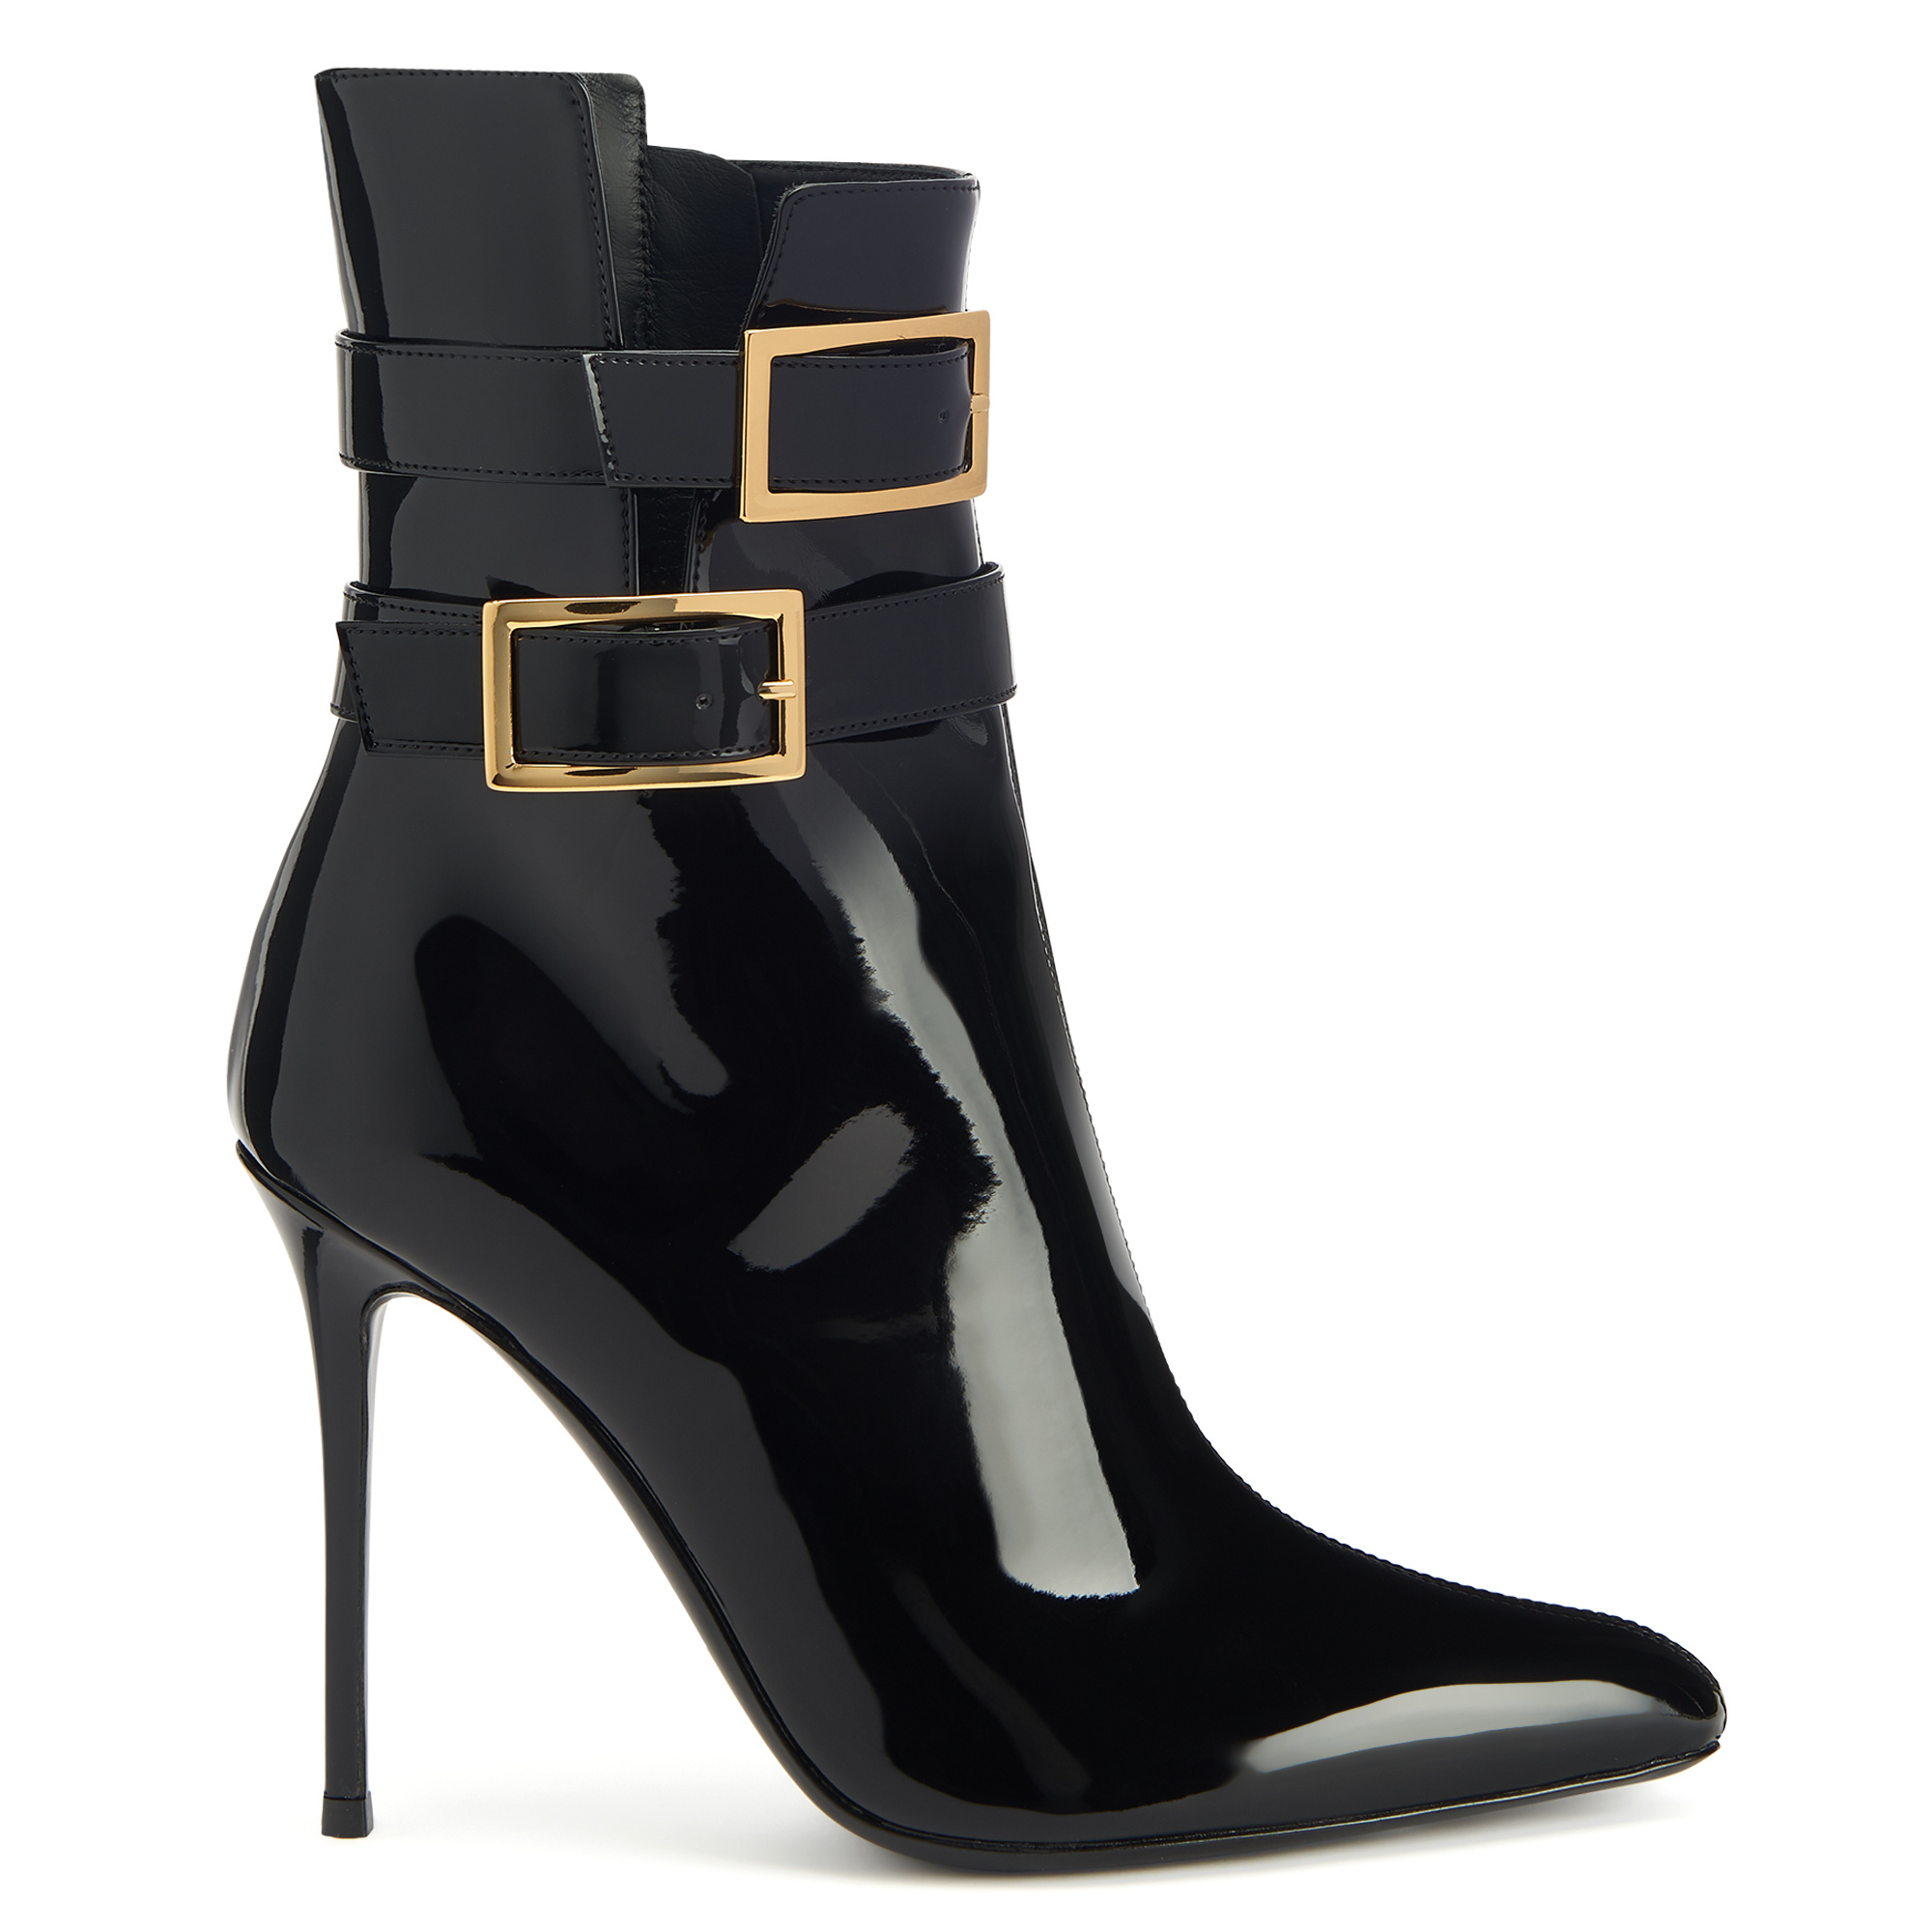 Giuseppe Zanotti Introduces the FW23 Collection